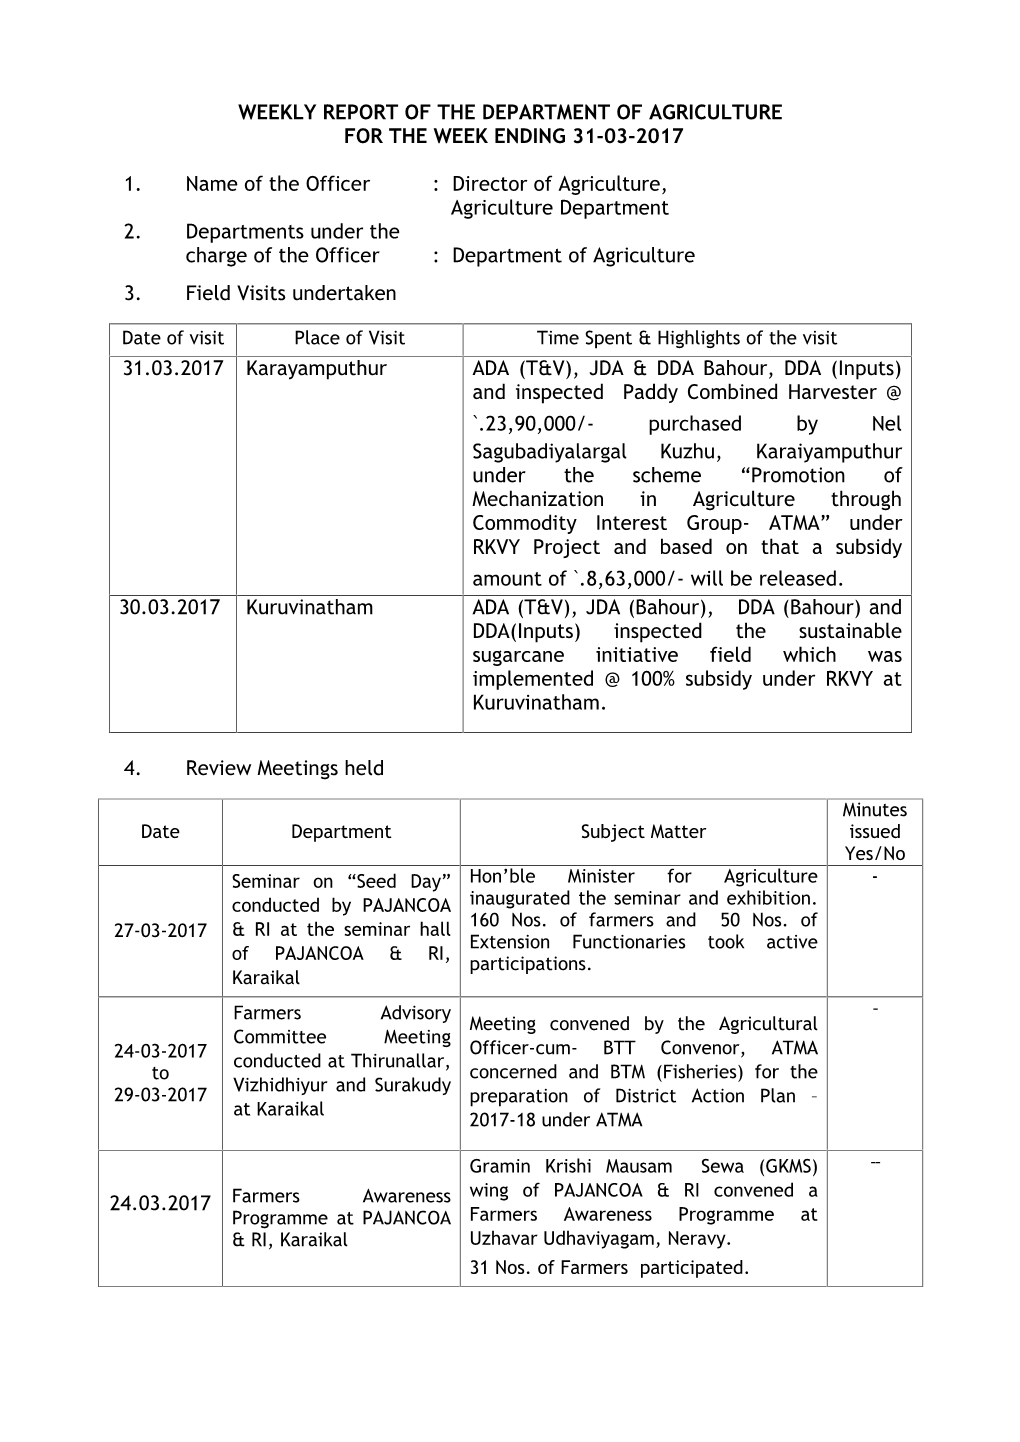 Weekly Report of the Department of Agriculture for the Week Ending 31-03-2017